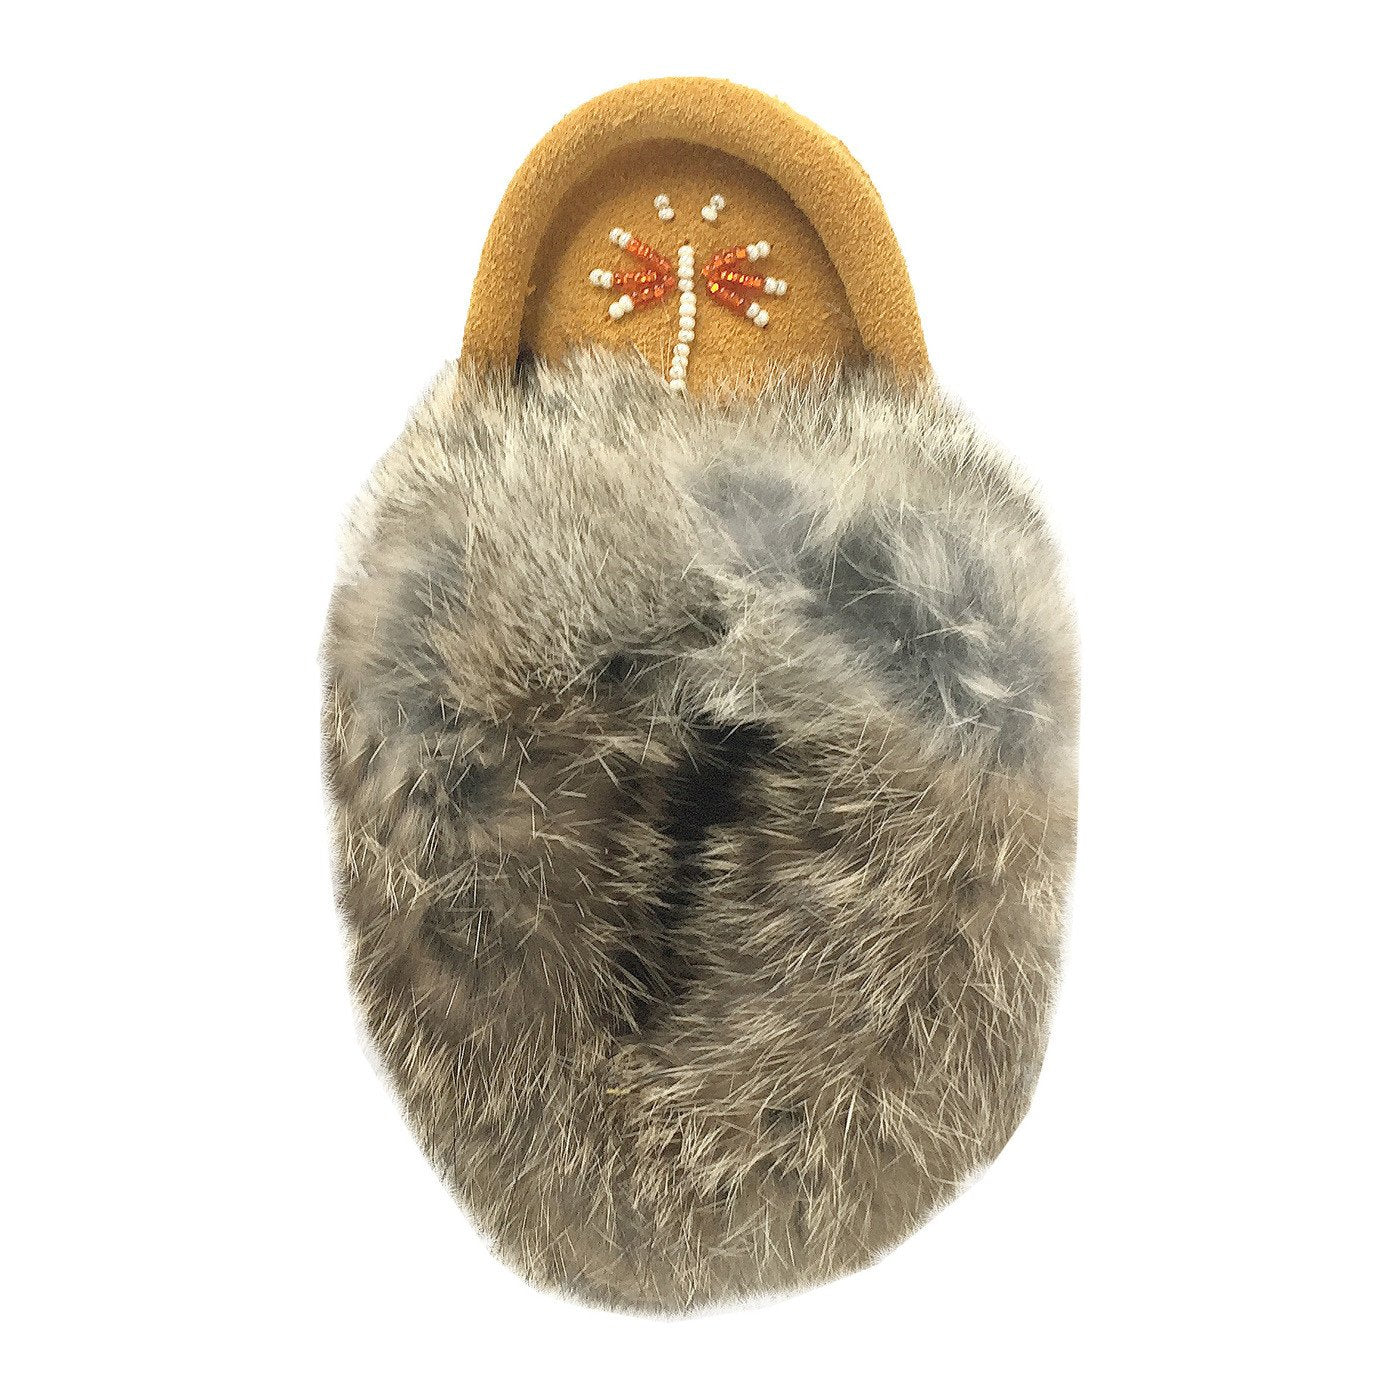 Children's Lined Rabbit Fur Beaded Moccasins (Final Clearance)